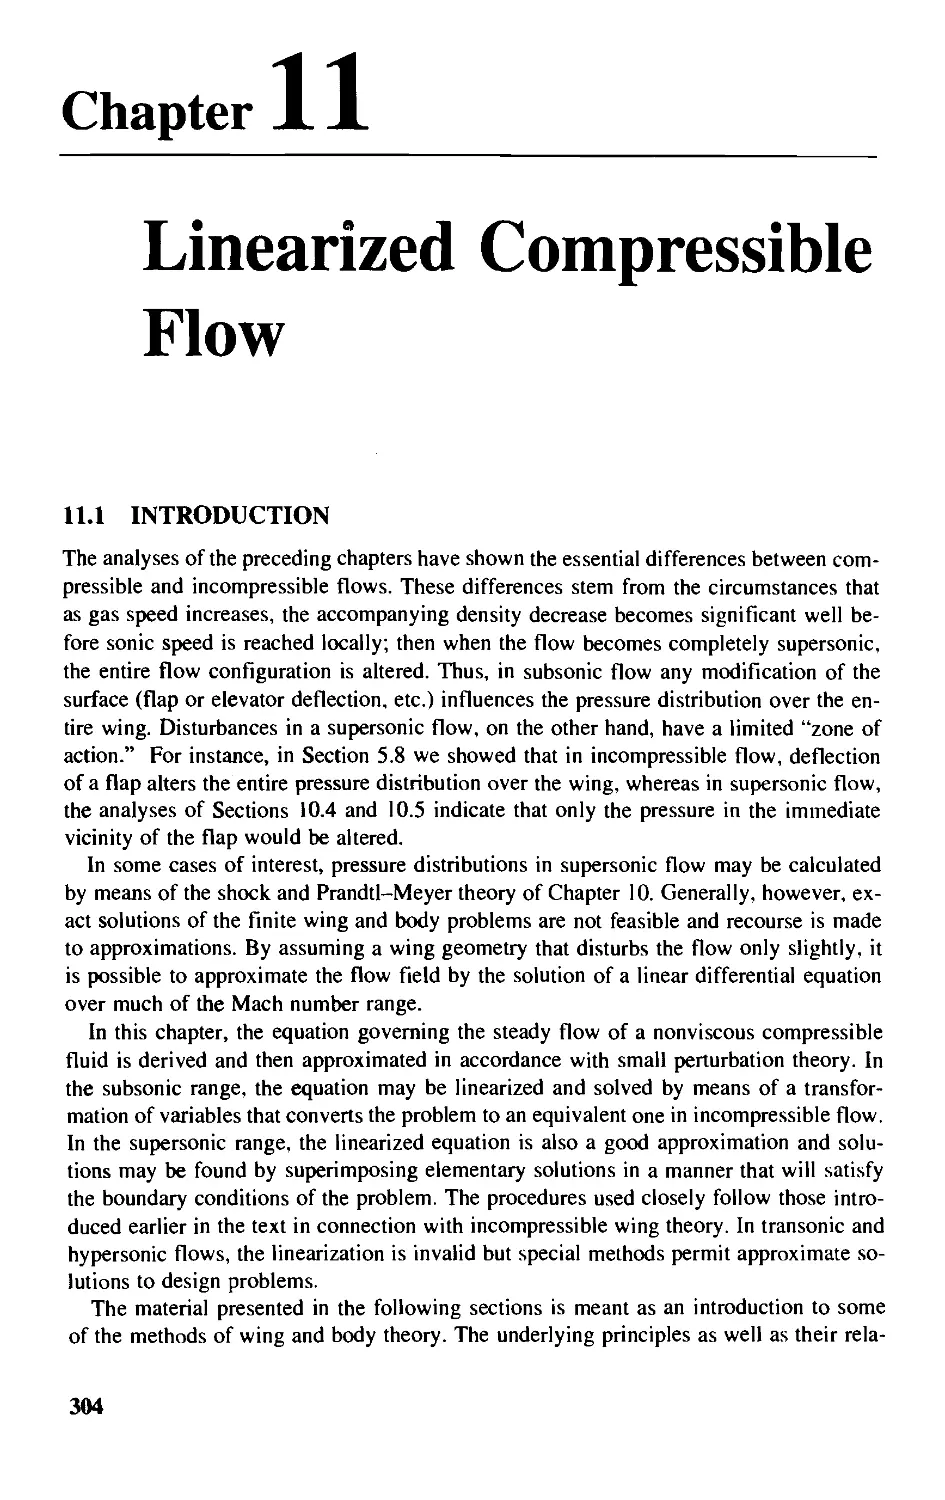 Chapter 11 - Linearized Compressible Flow